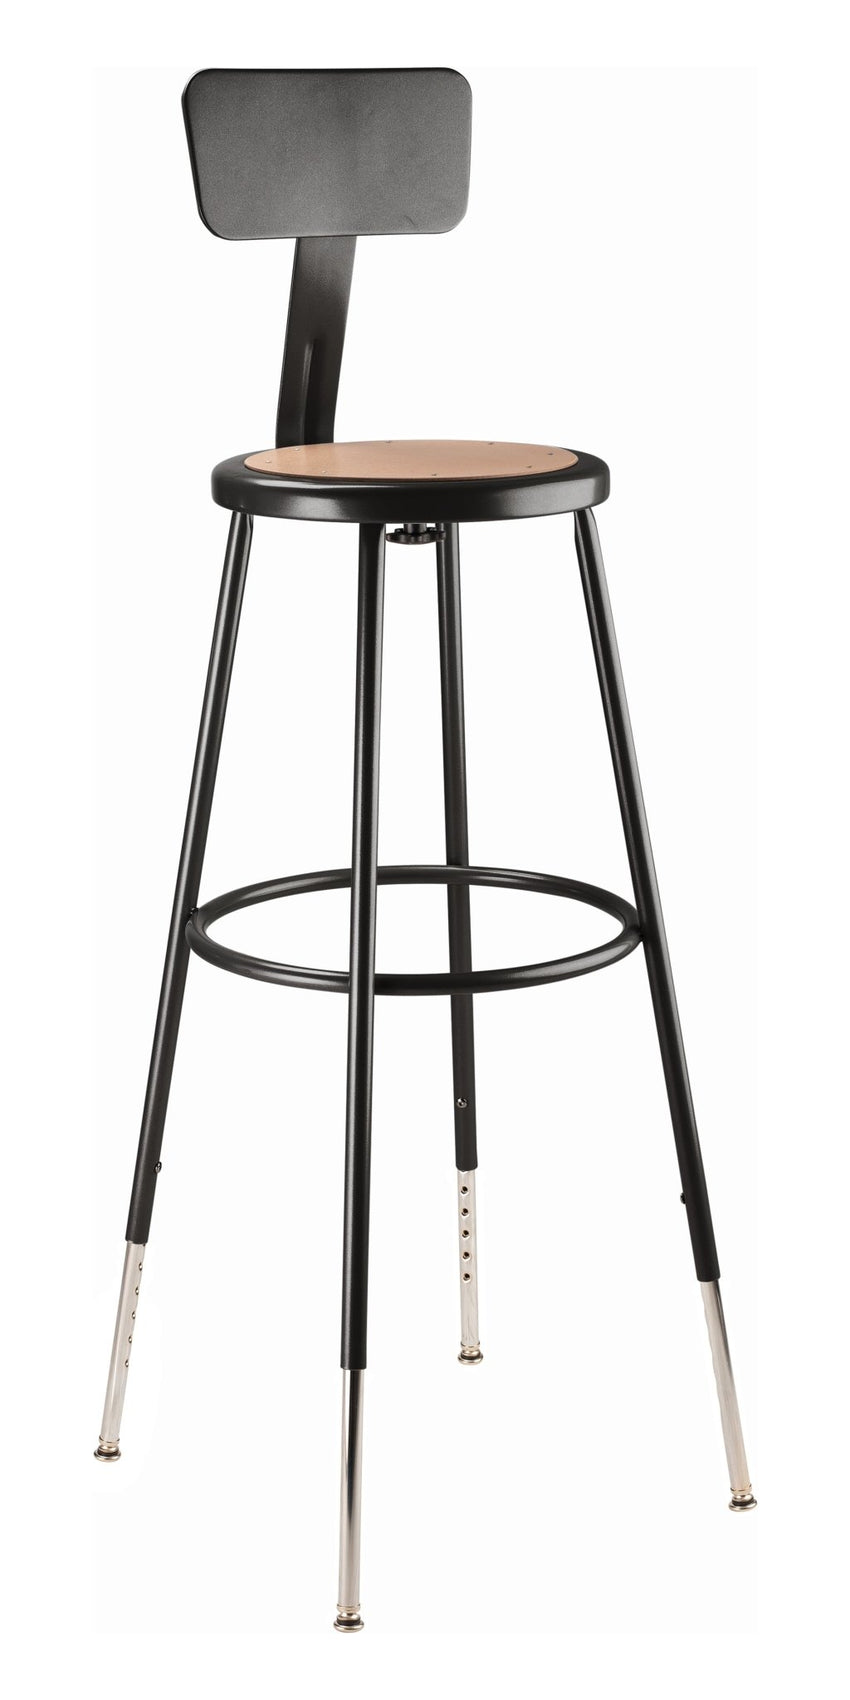 NPS 30.5" - 38.5" Height Adjustable Heavy Duty Steel Stool with Backrest (National Public Seating NPS-6230HB) - SchoolOutlet